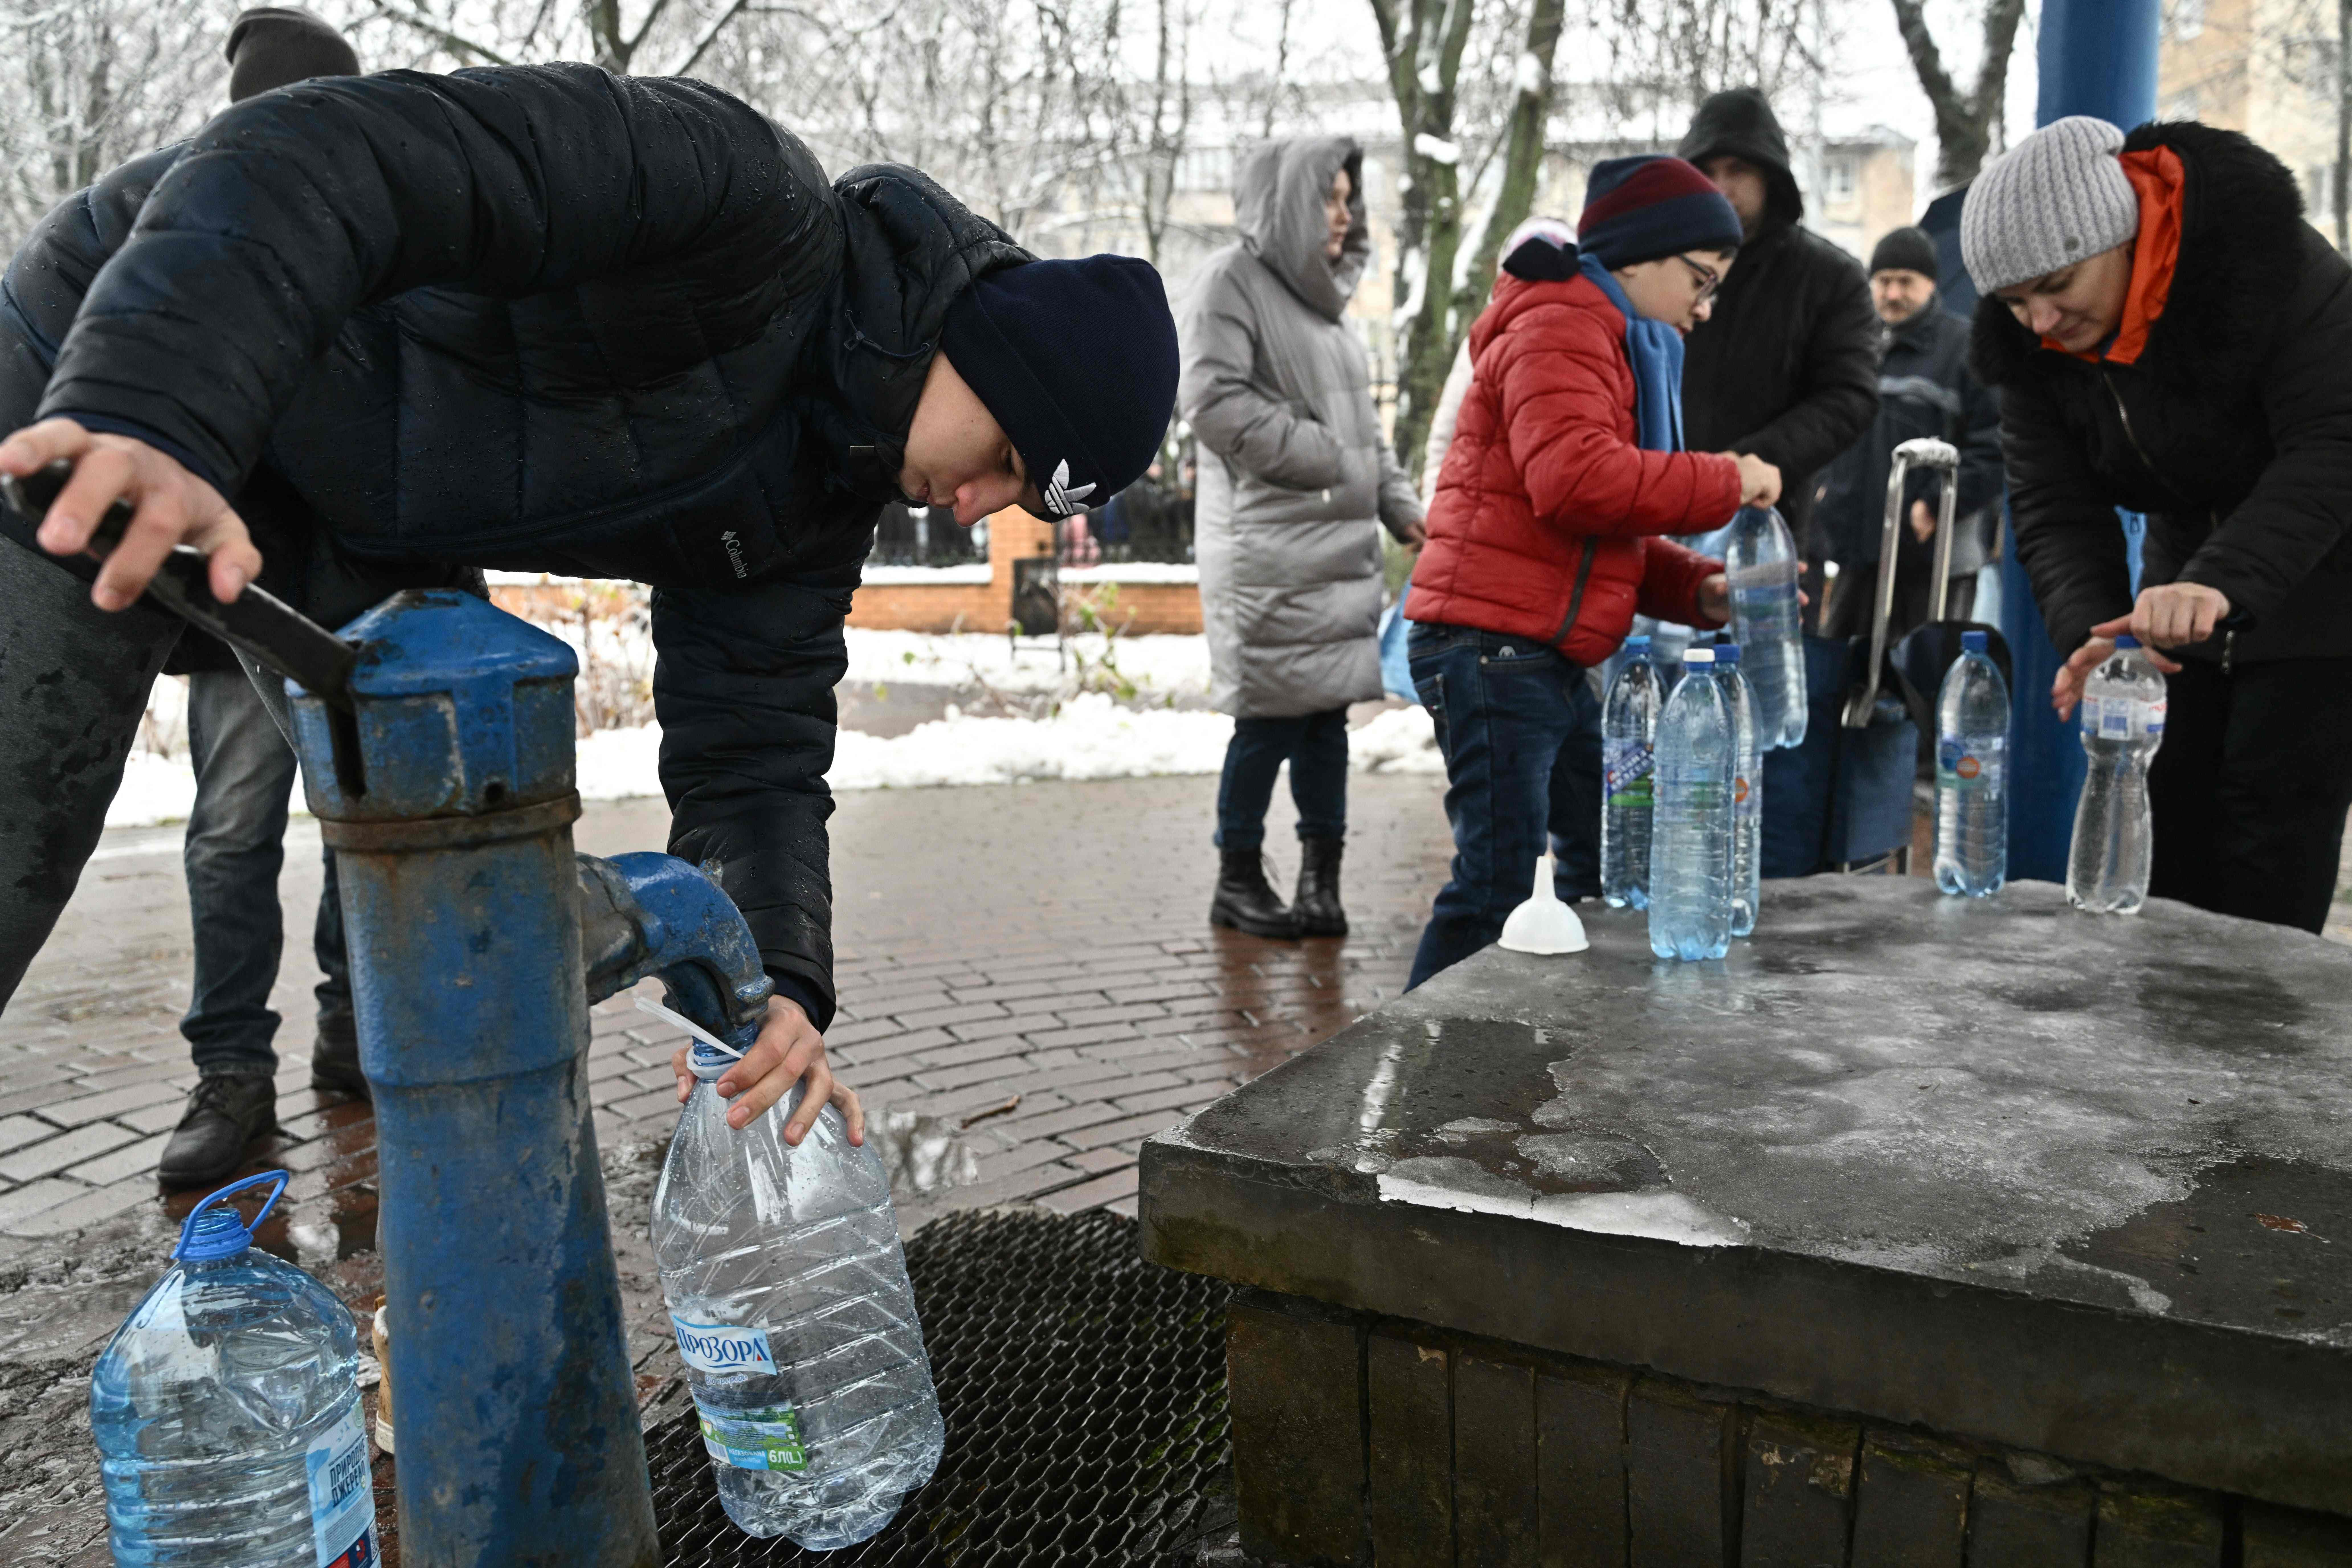 Kyiv residents fill plastic bottles at a water pump in a park in Kyiv